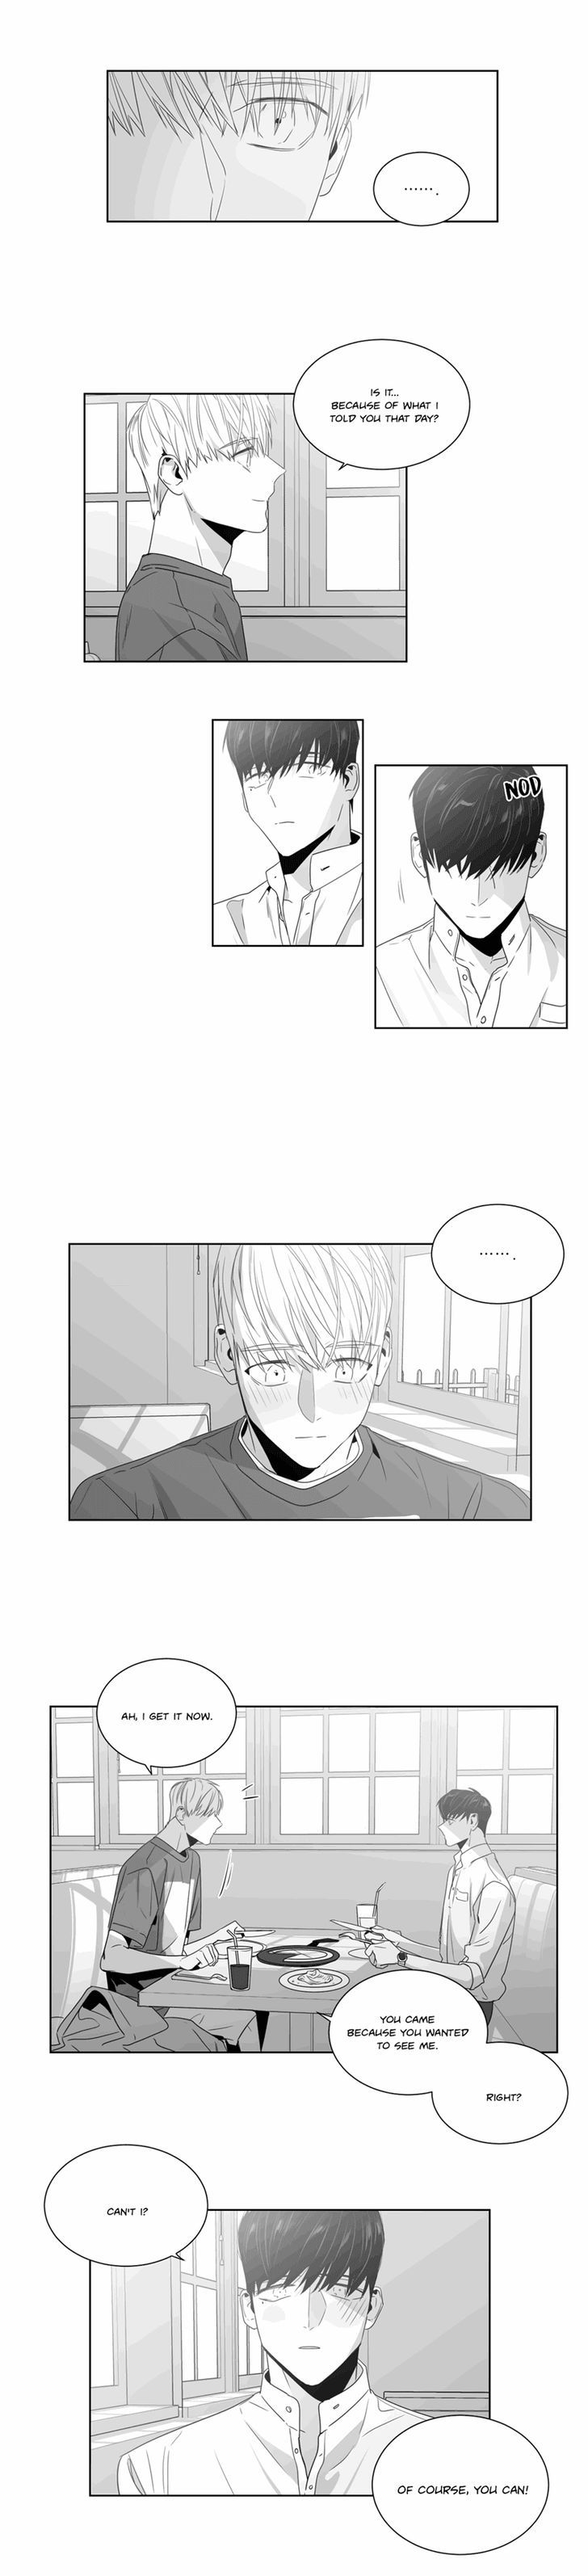 Lover Boy (Lezhin) Chapter 038 page 10